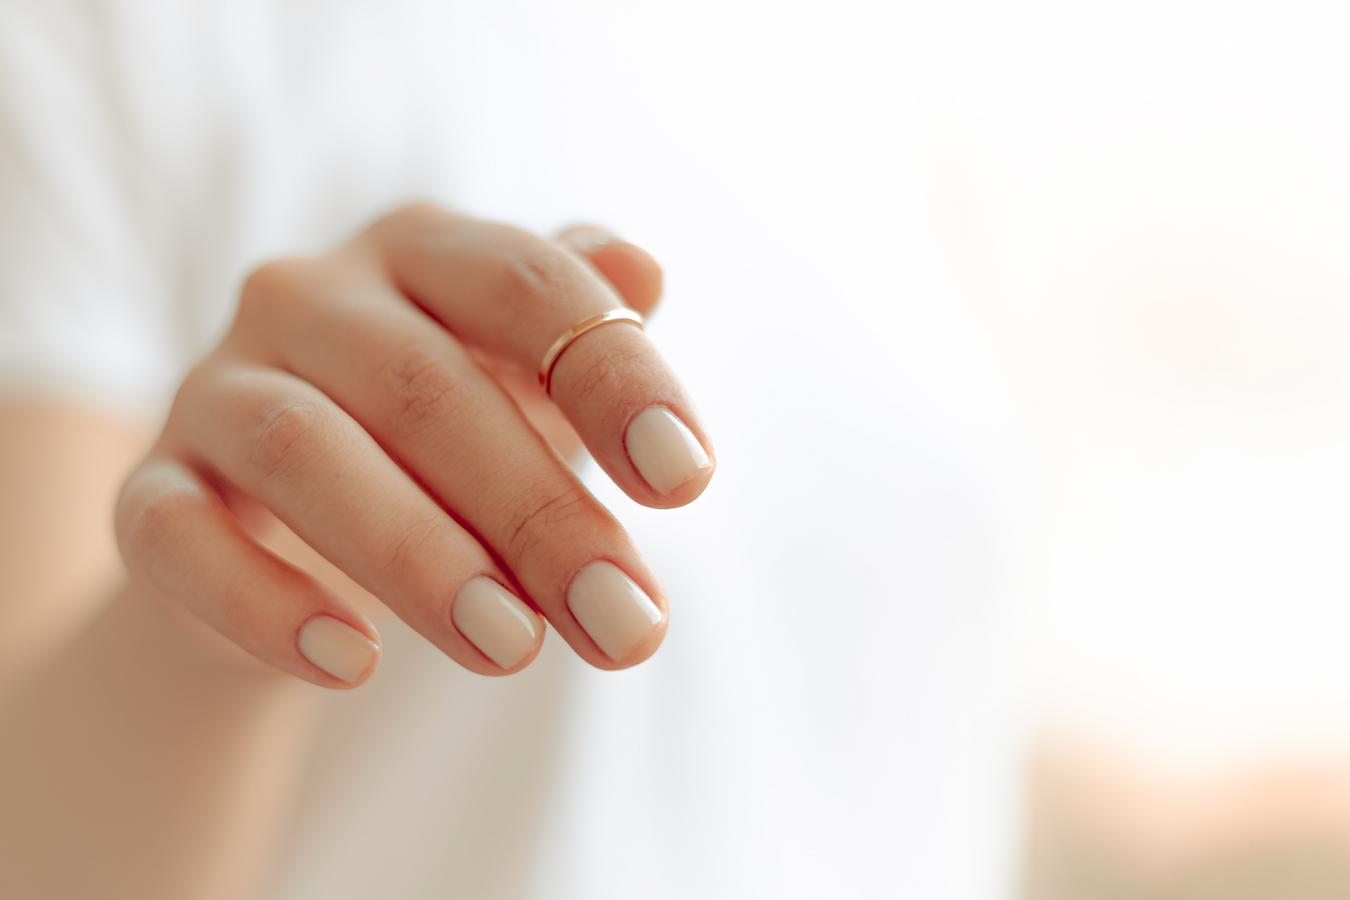 7 Gross Things That Happen When You Bite Your Nails | Prevention